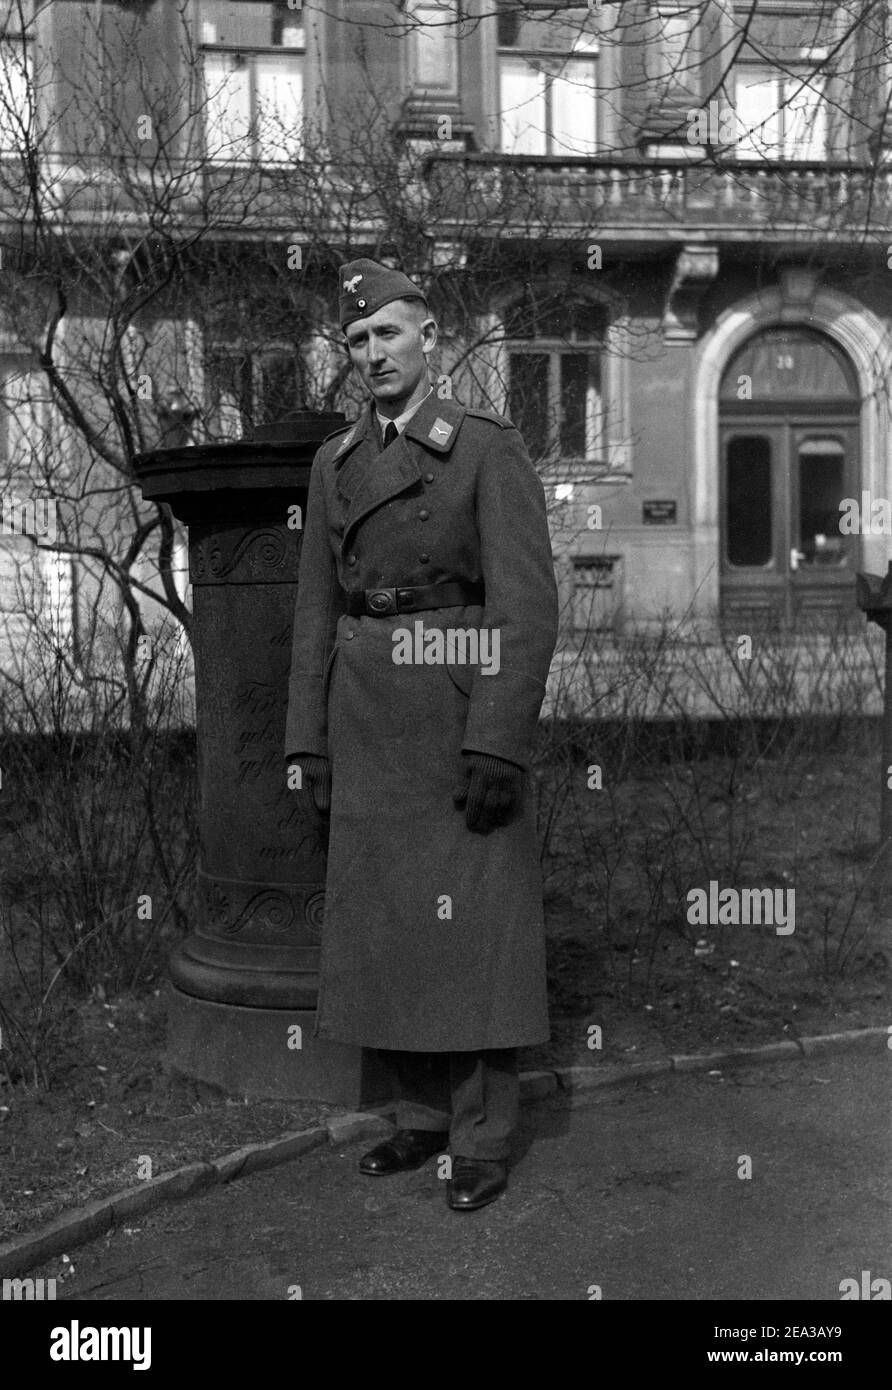 soldier, April 1942, Hanover, Germany Stock Photo